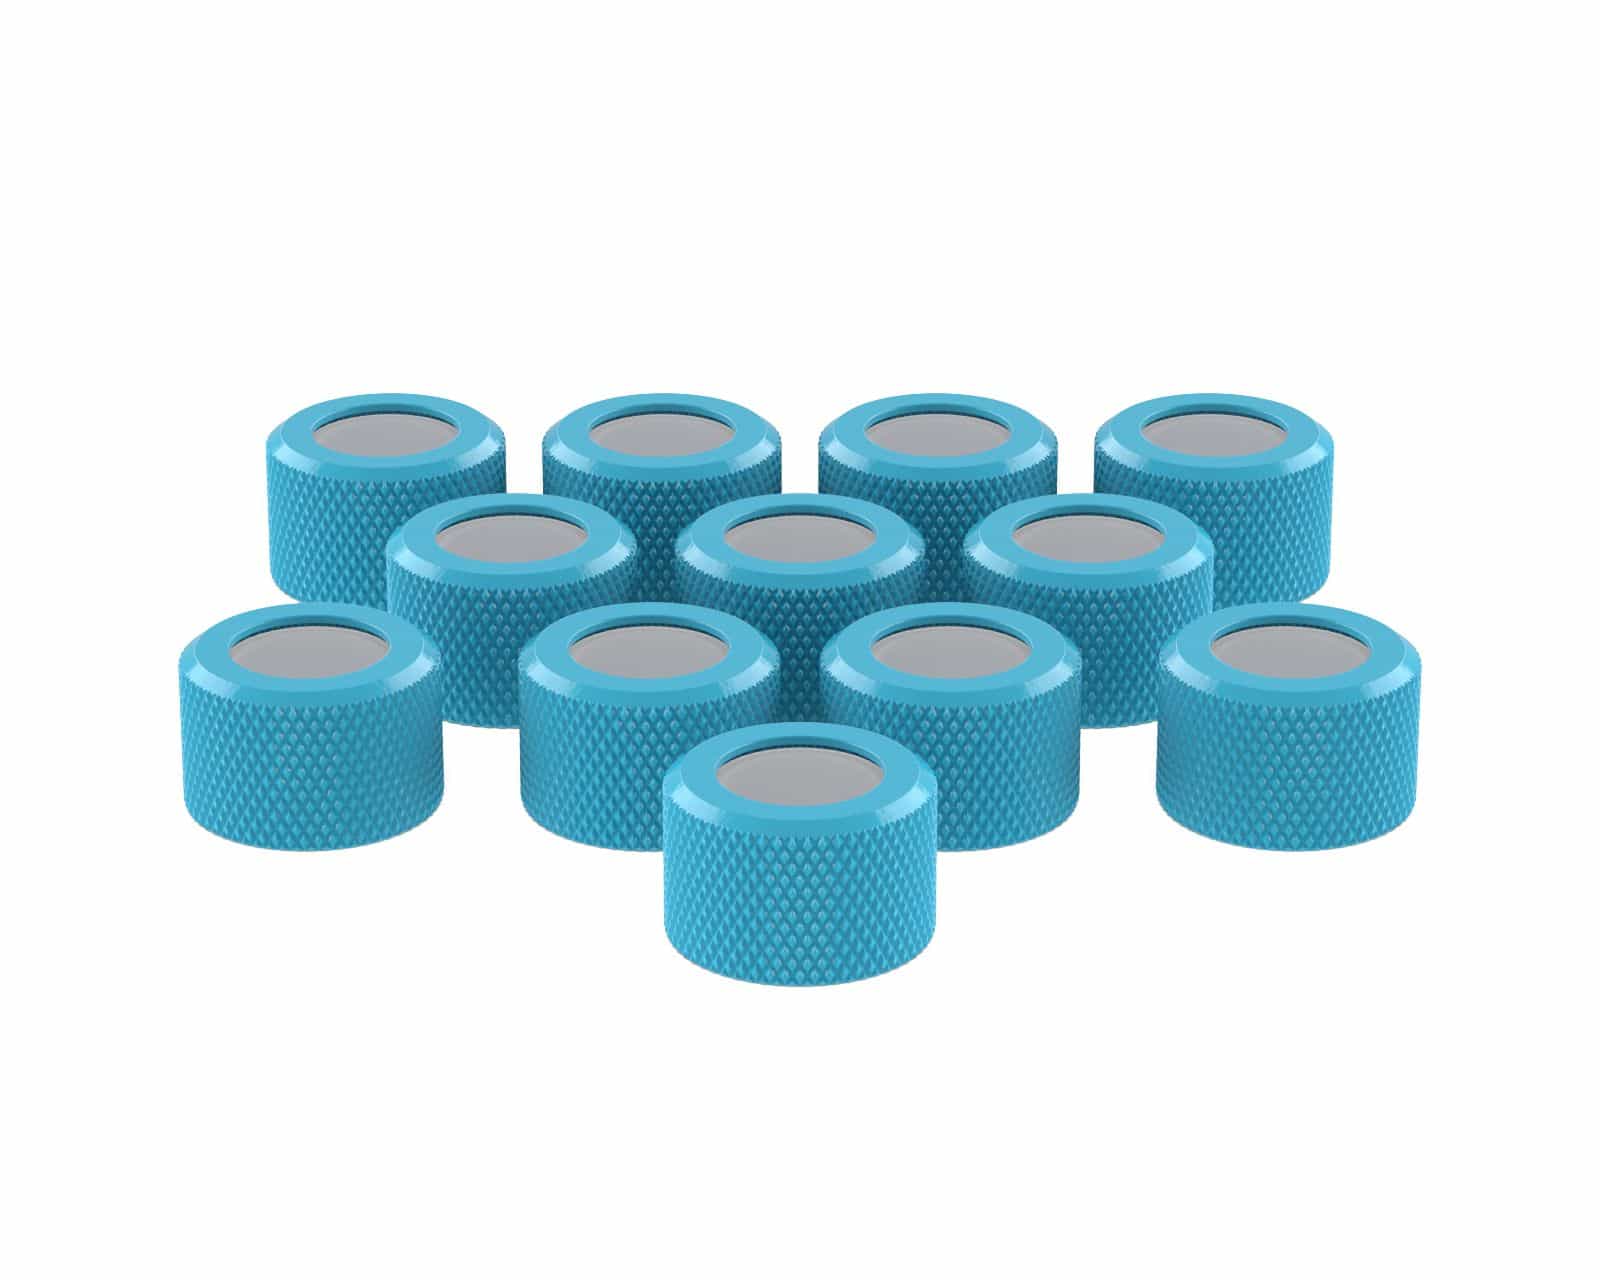 PrimoChill RMSX Replacement Cap Switch Over Kit - 14mm - PrimoChill - KEEPING IT COOL Sky Blue